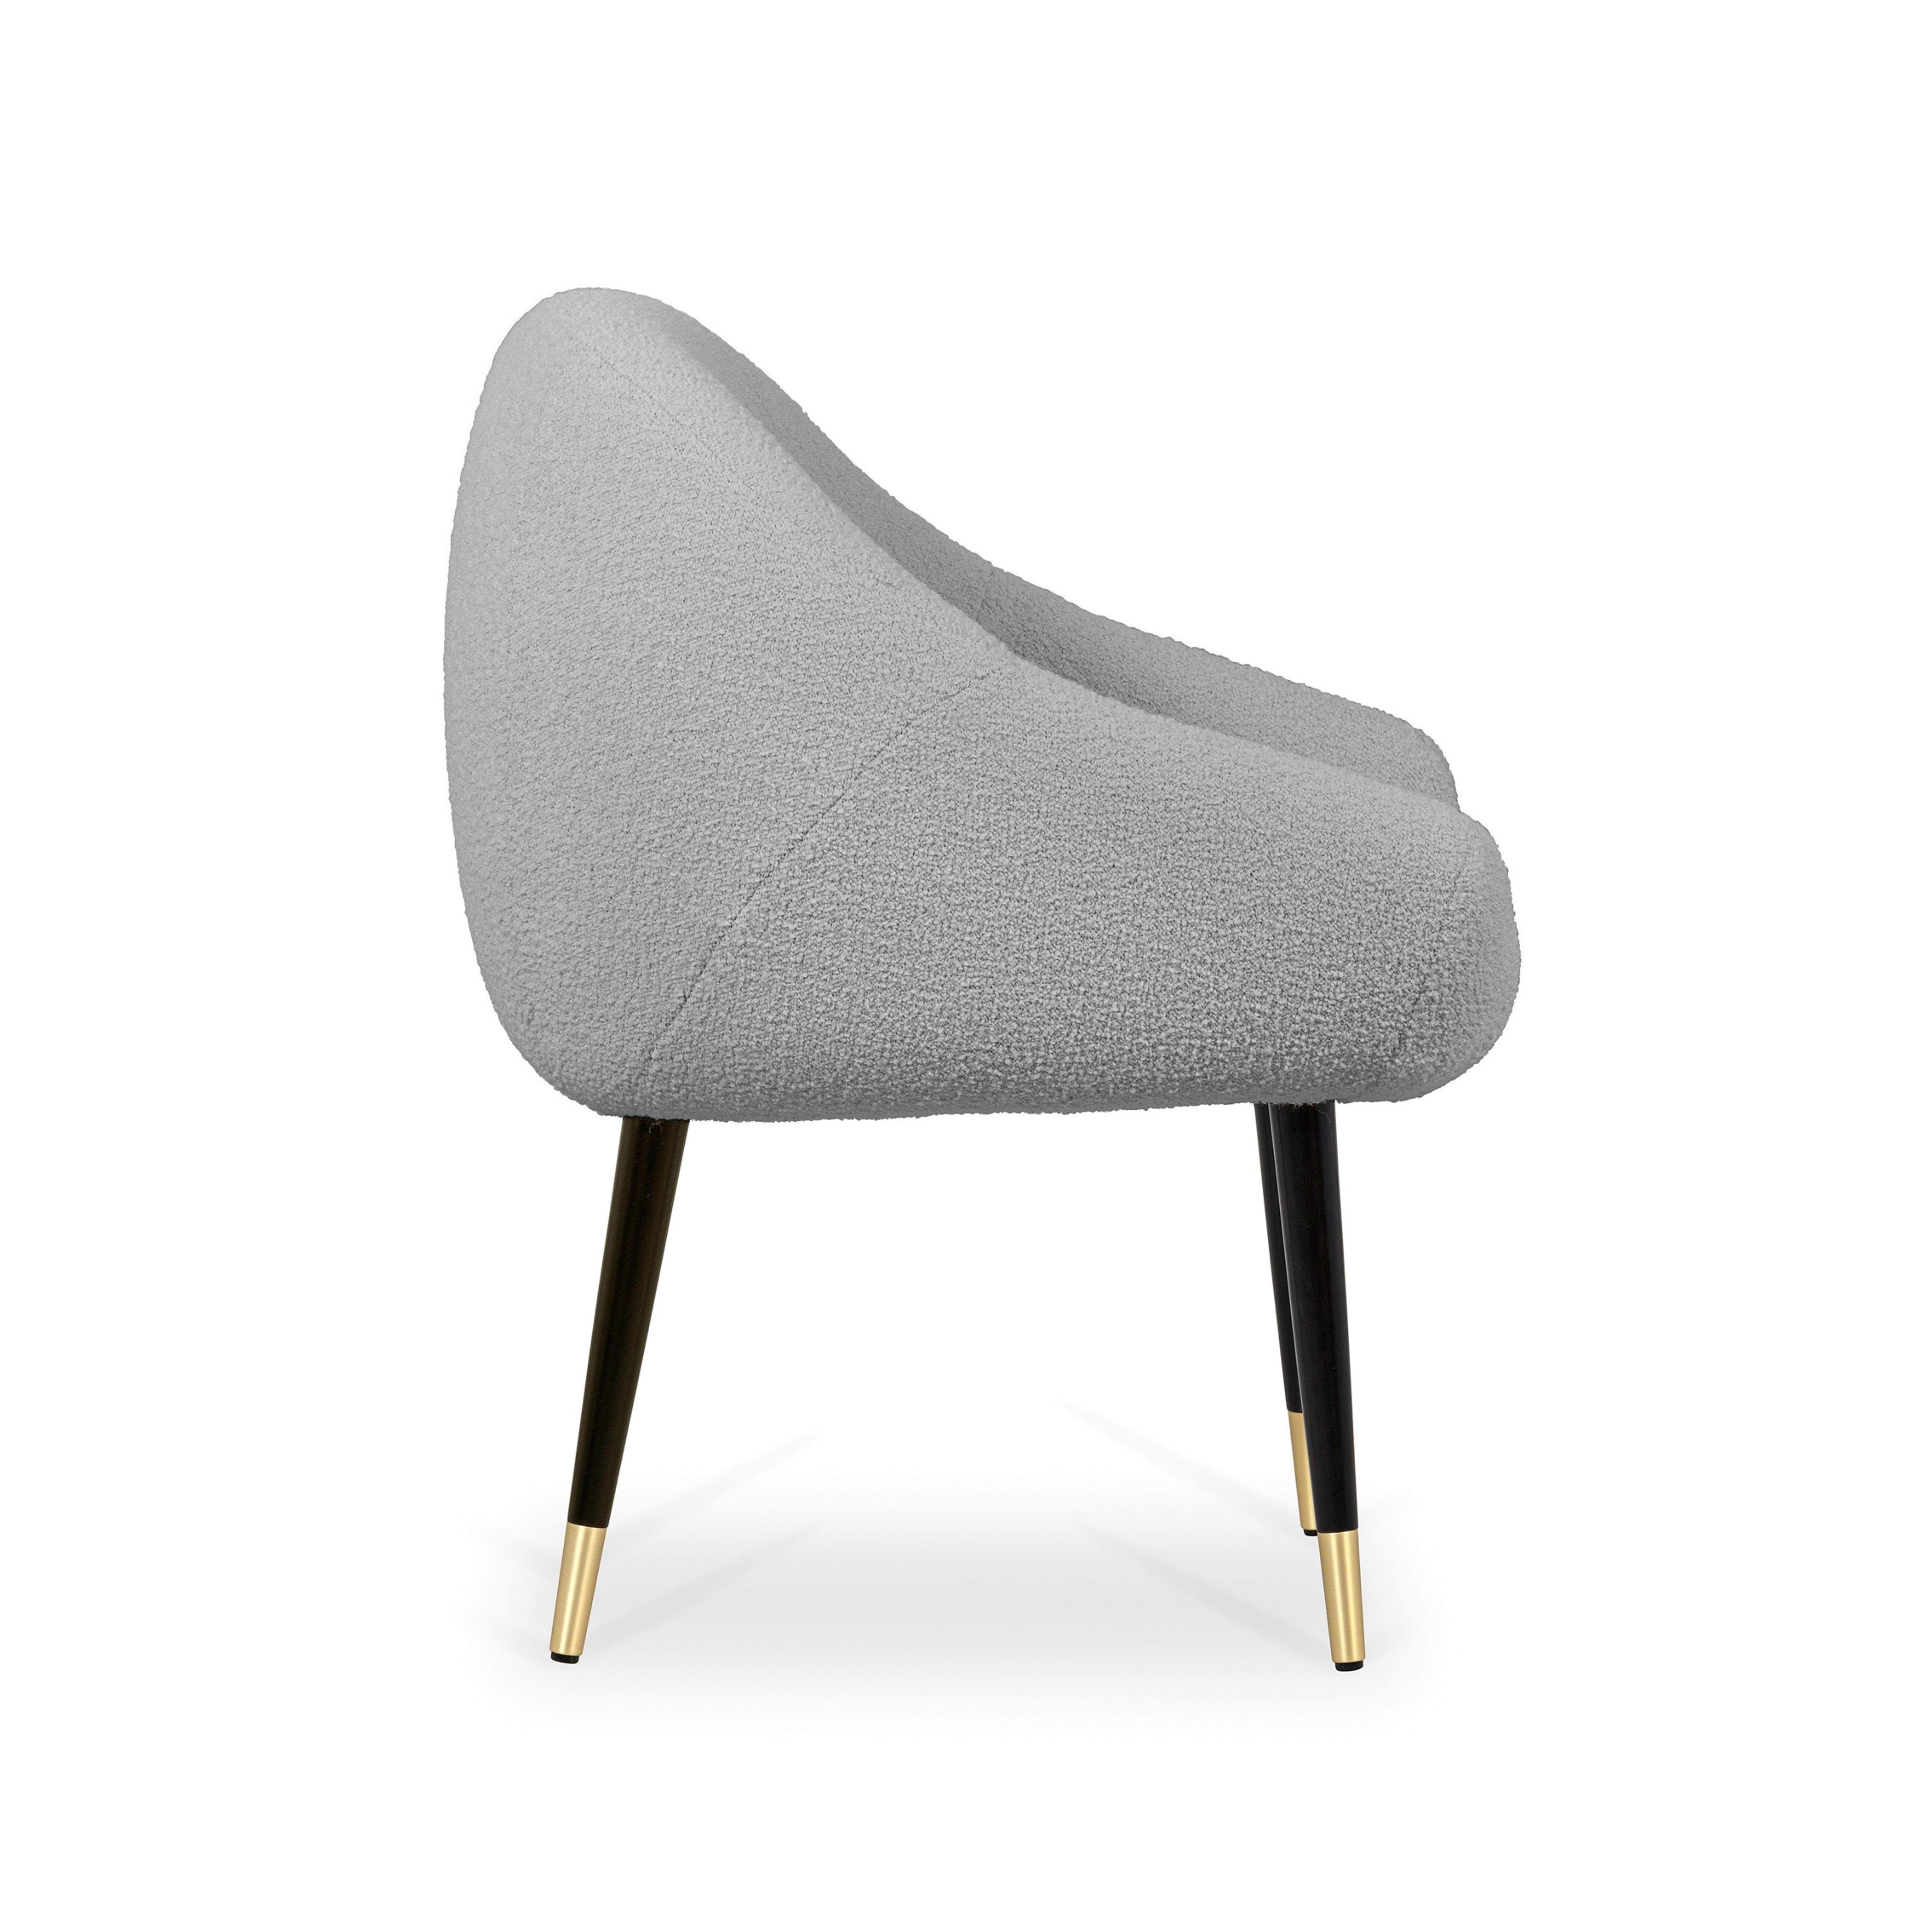 Portuguese Niemeyer Dining Chair, Bouclé and Brass, Insidherland by Joana Santos Barbosa For Sale